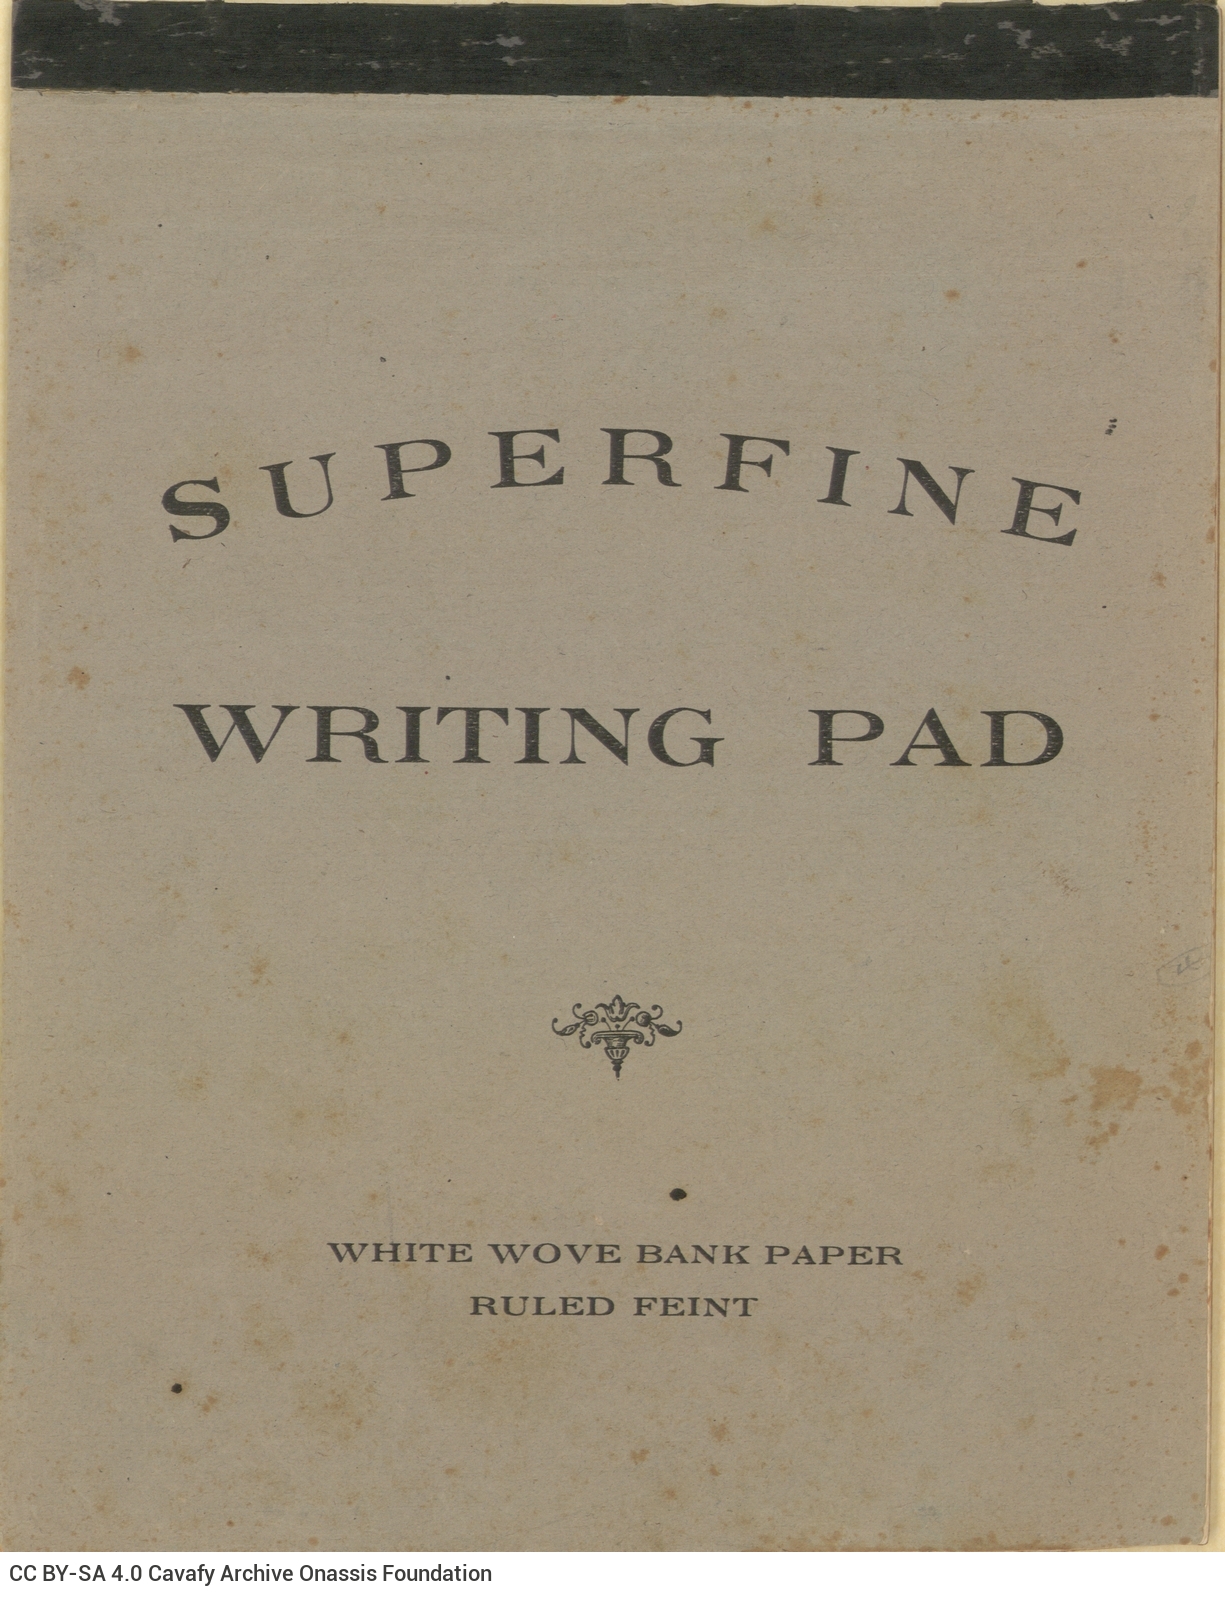 *Superfine Writing Pad* correspondence pad filled with handwritten notes, most of which have been crossed out, obviously f